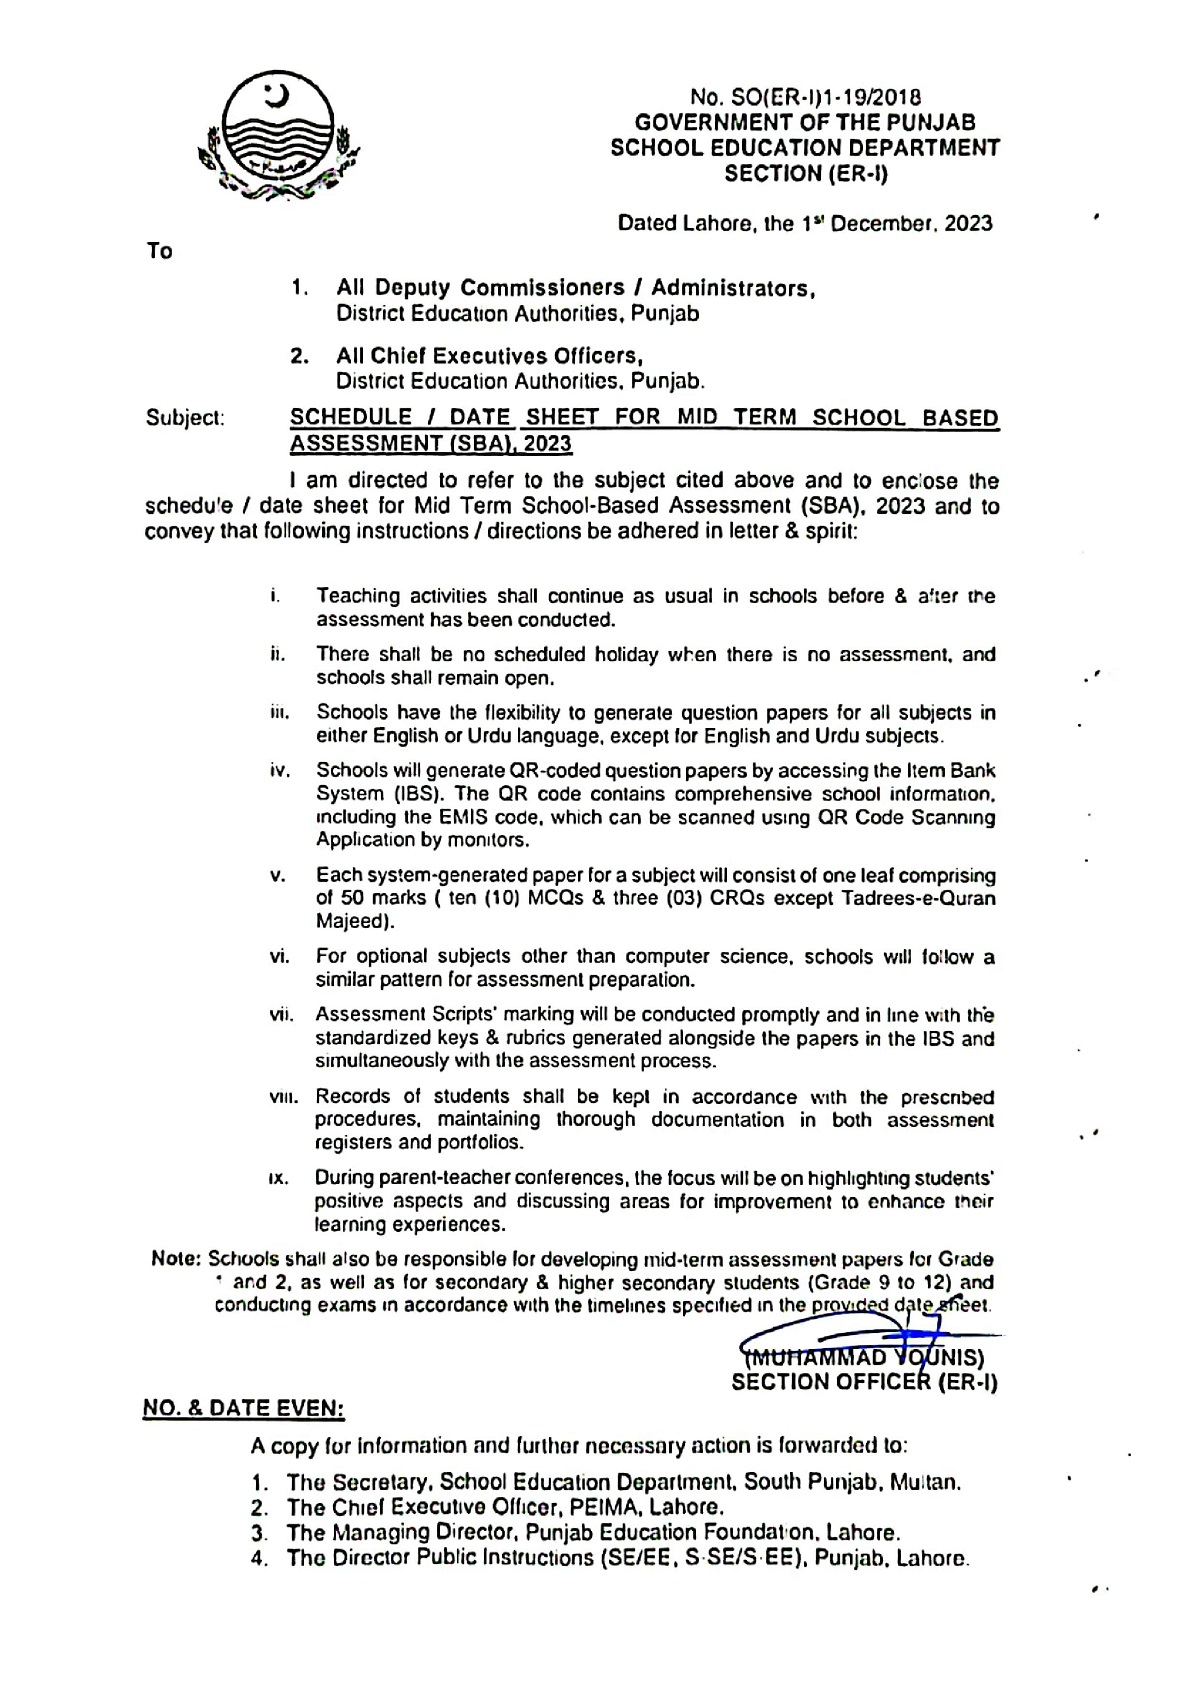 Instructions for School Base Assessment 2023 for Schools in Punjab